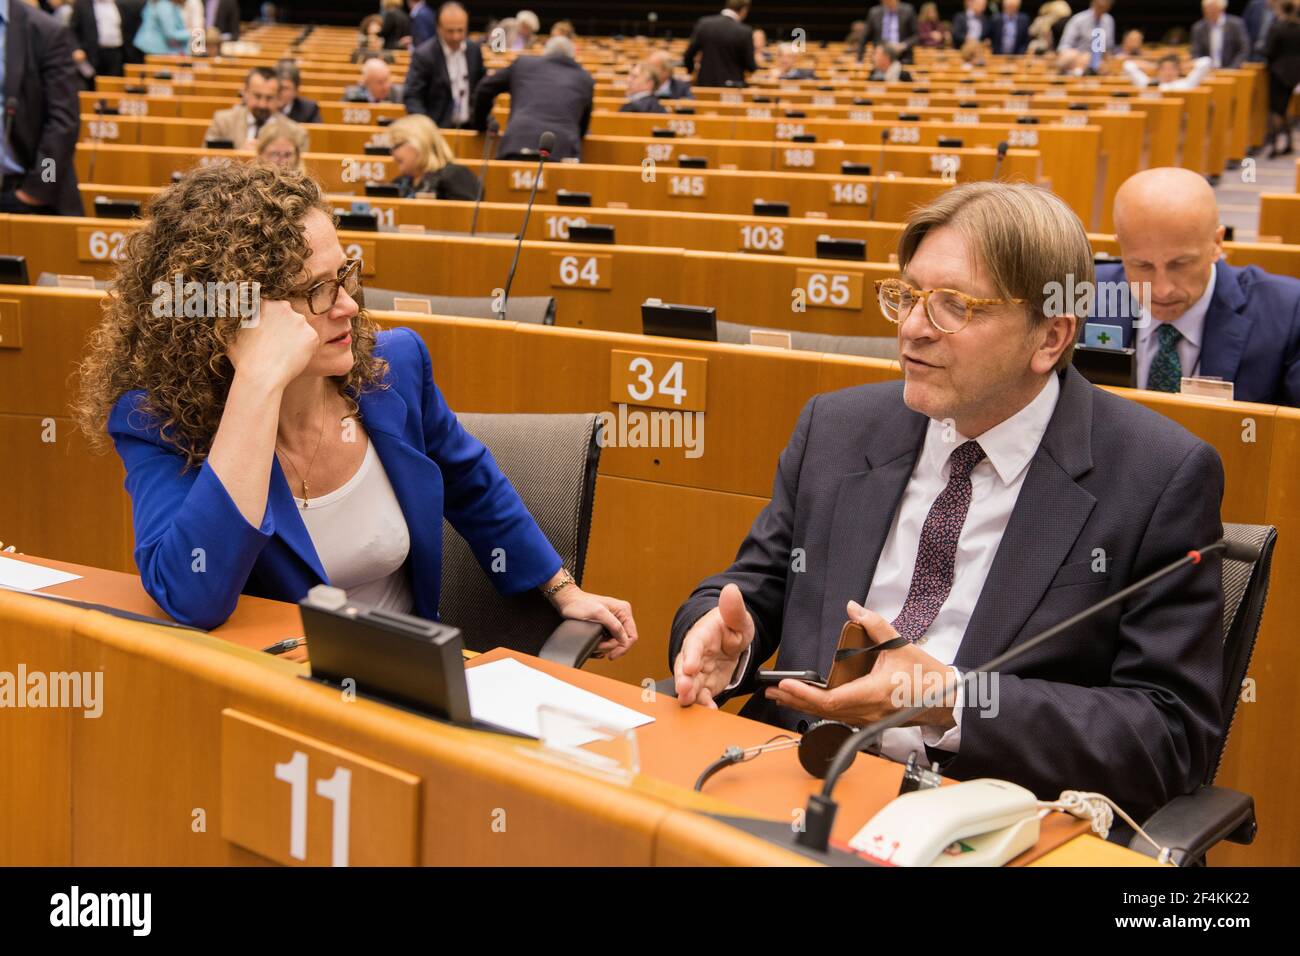 Brussels, Belgium. Member of European Parliament, Mrs. Sofia in 't Veld and Mr. Guy Verhofstadt having a conversation, prior to a plenary session. Stock Photo